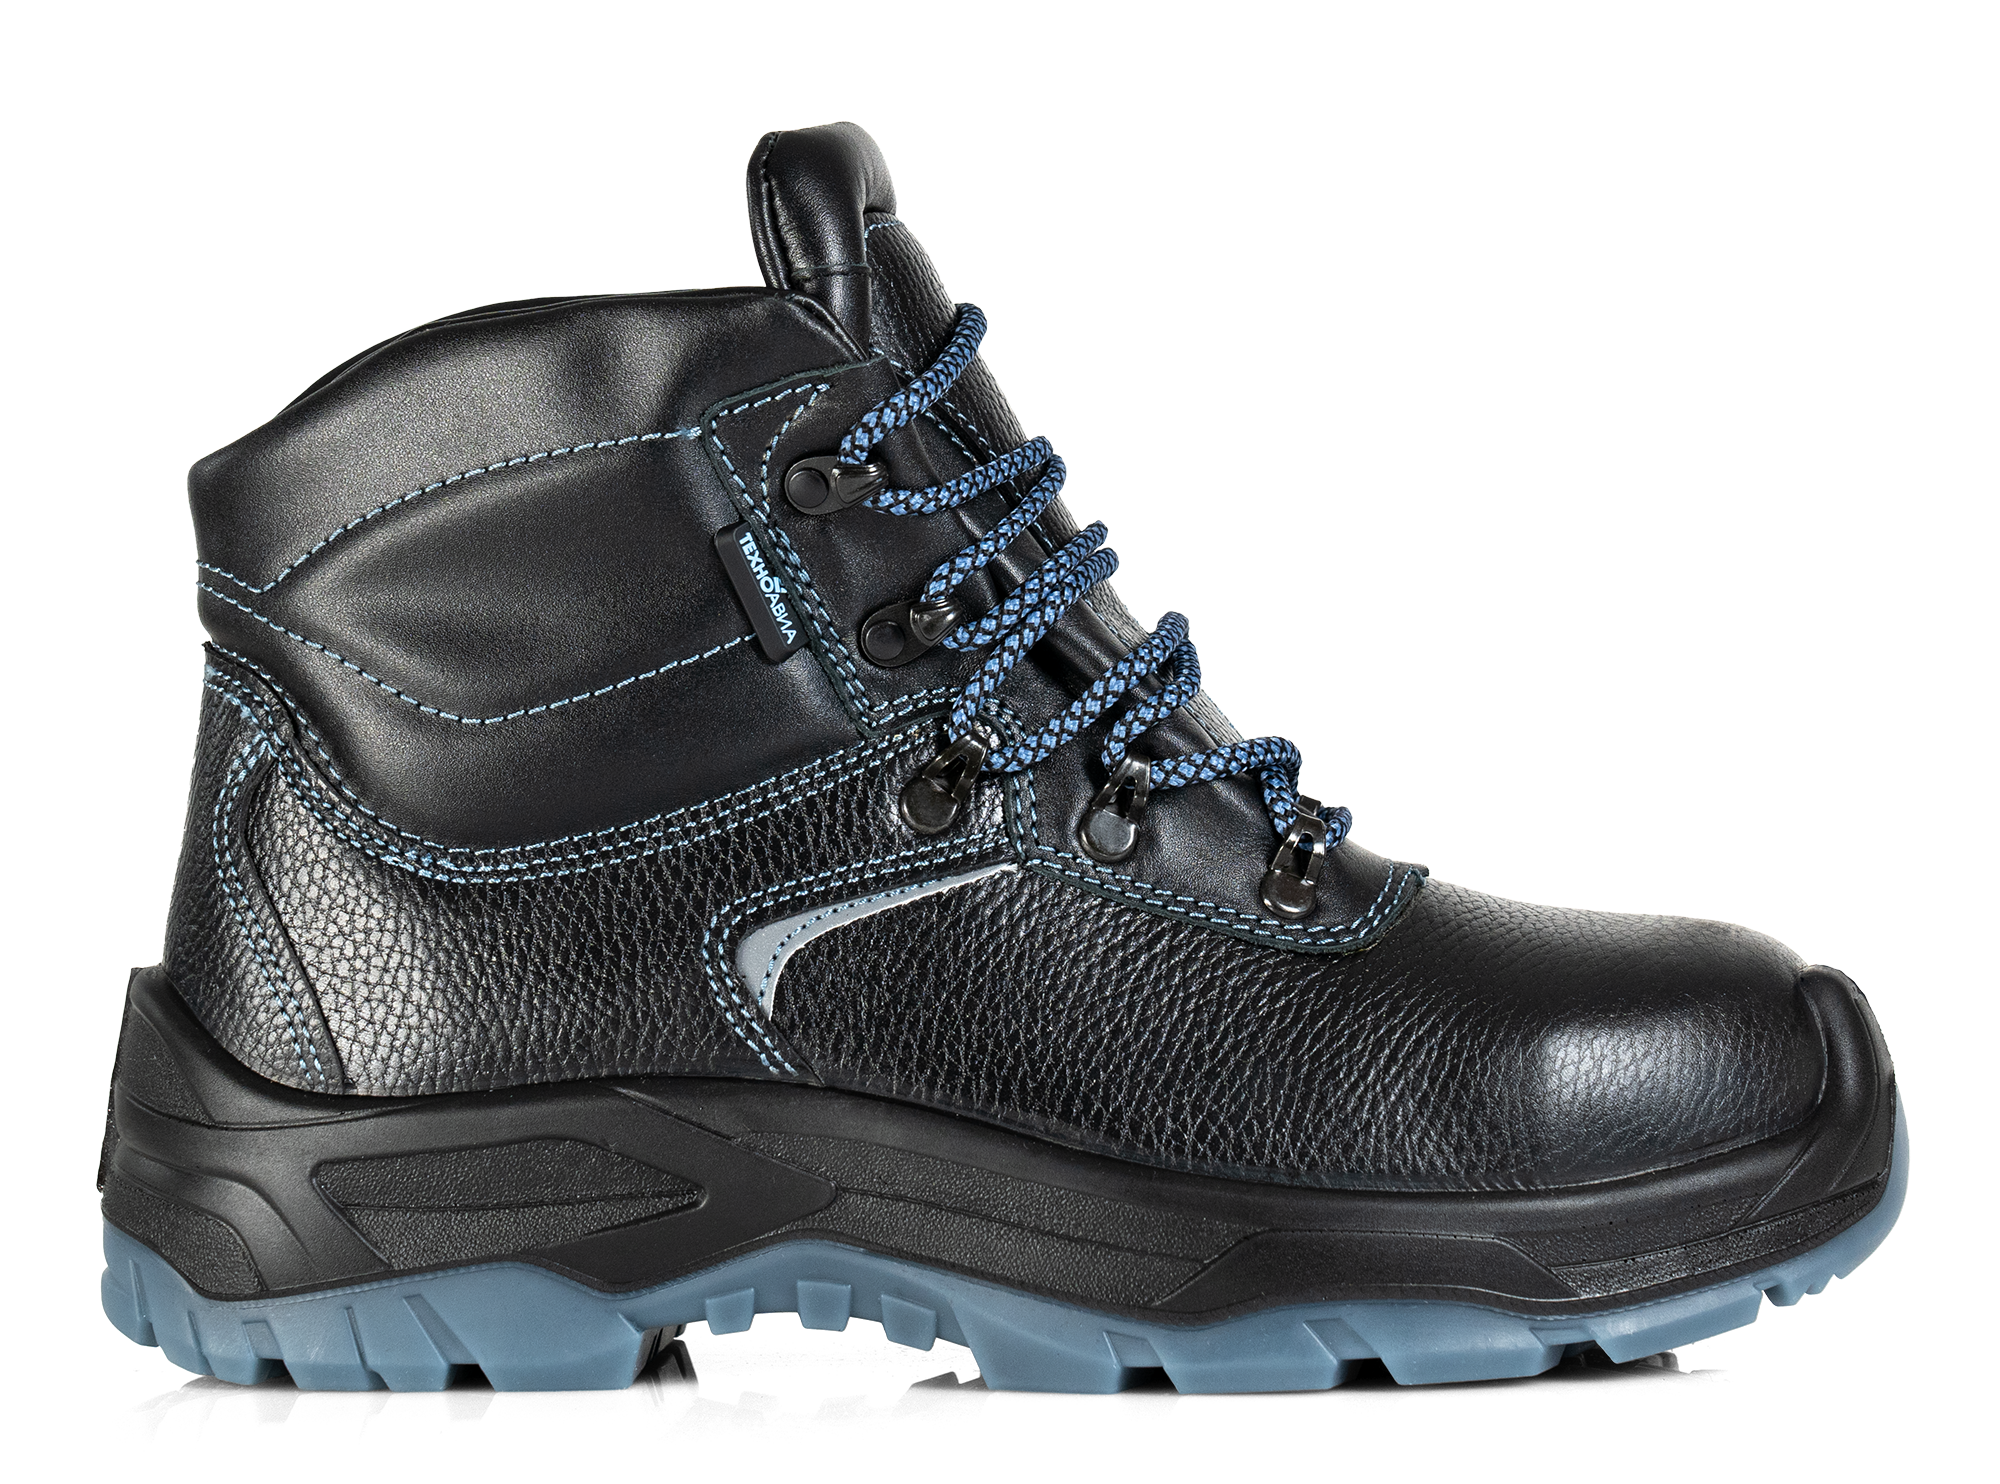 TECHNOGARD-2 insulated men’s high ankle leather boots